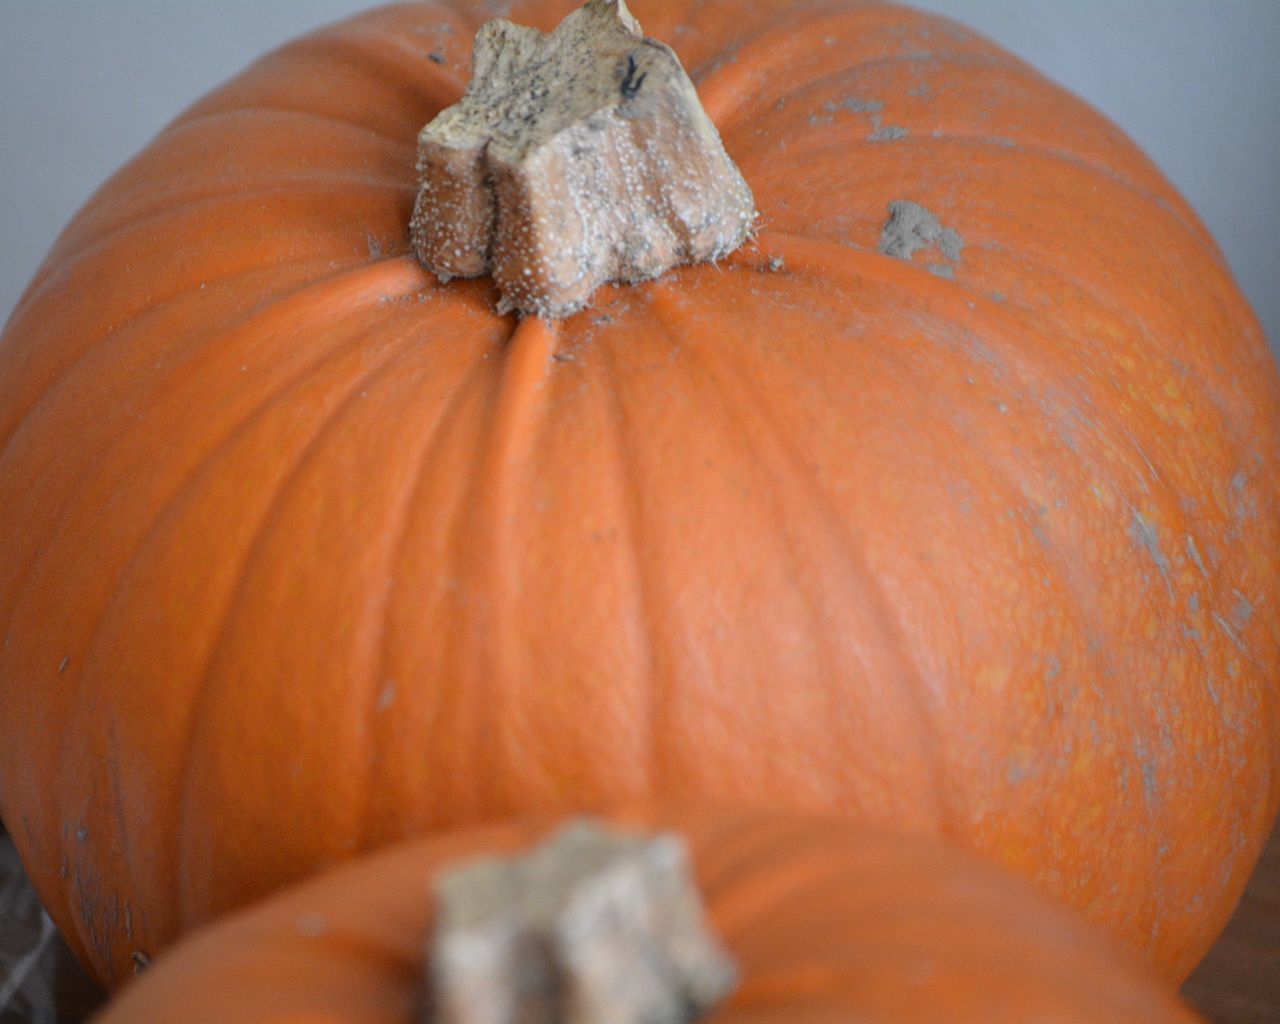 CLOSE-UP OF PUMPKIN ON PERSON